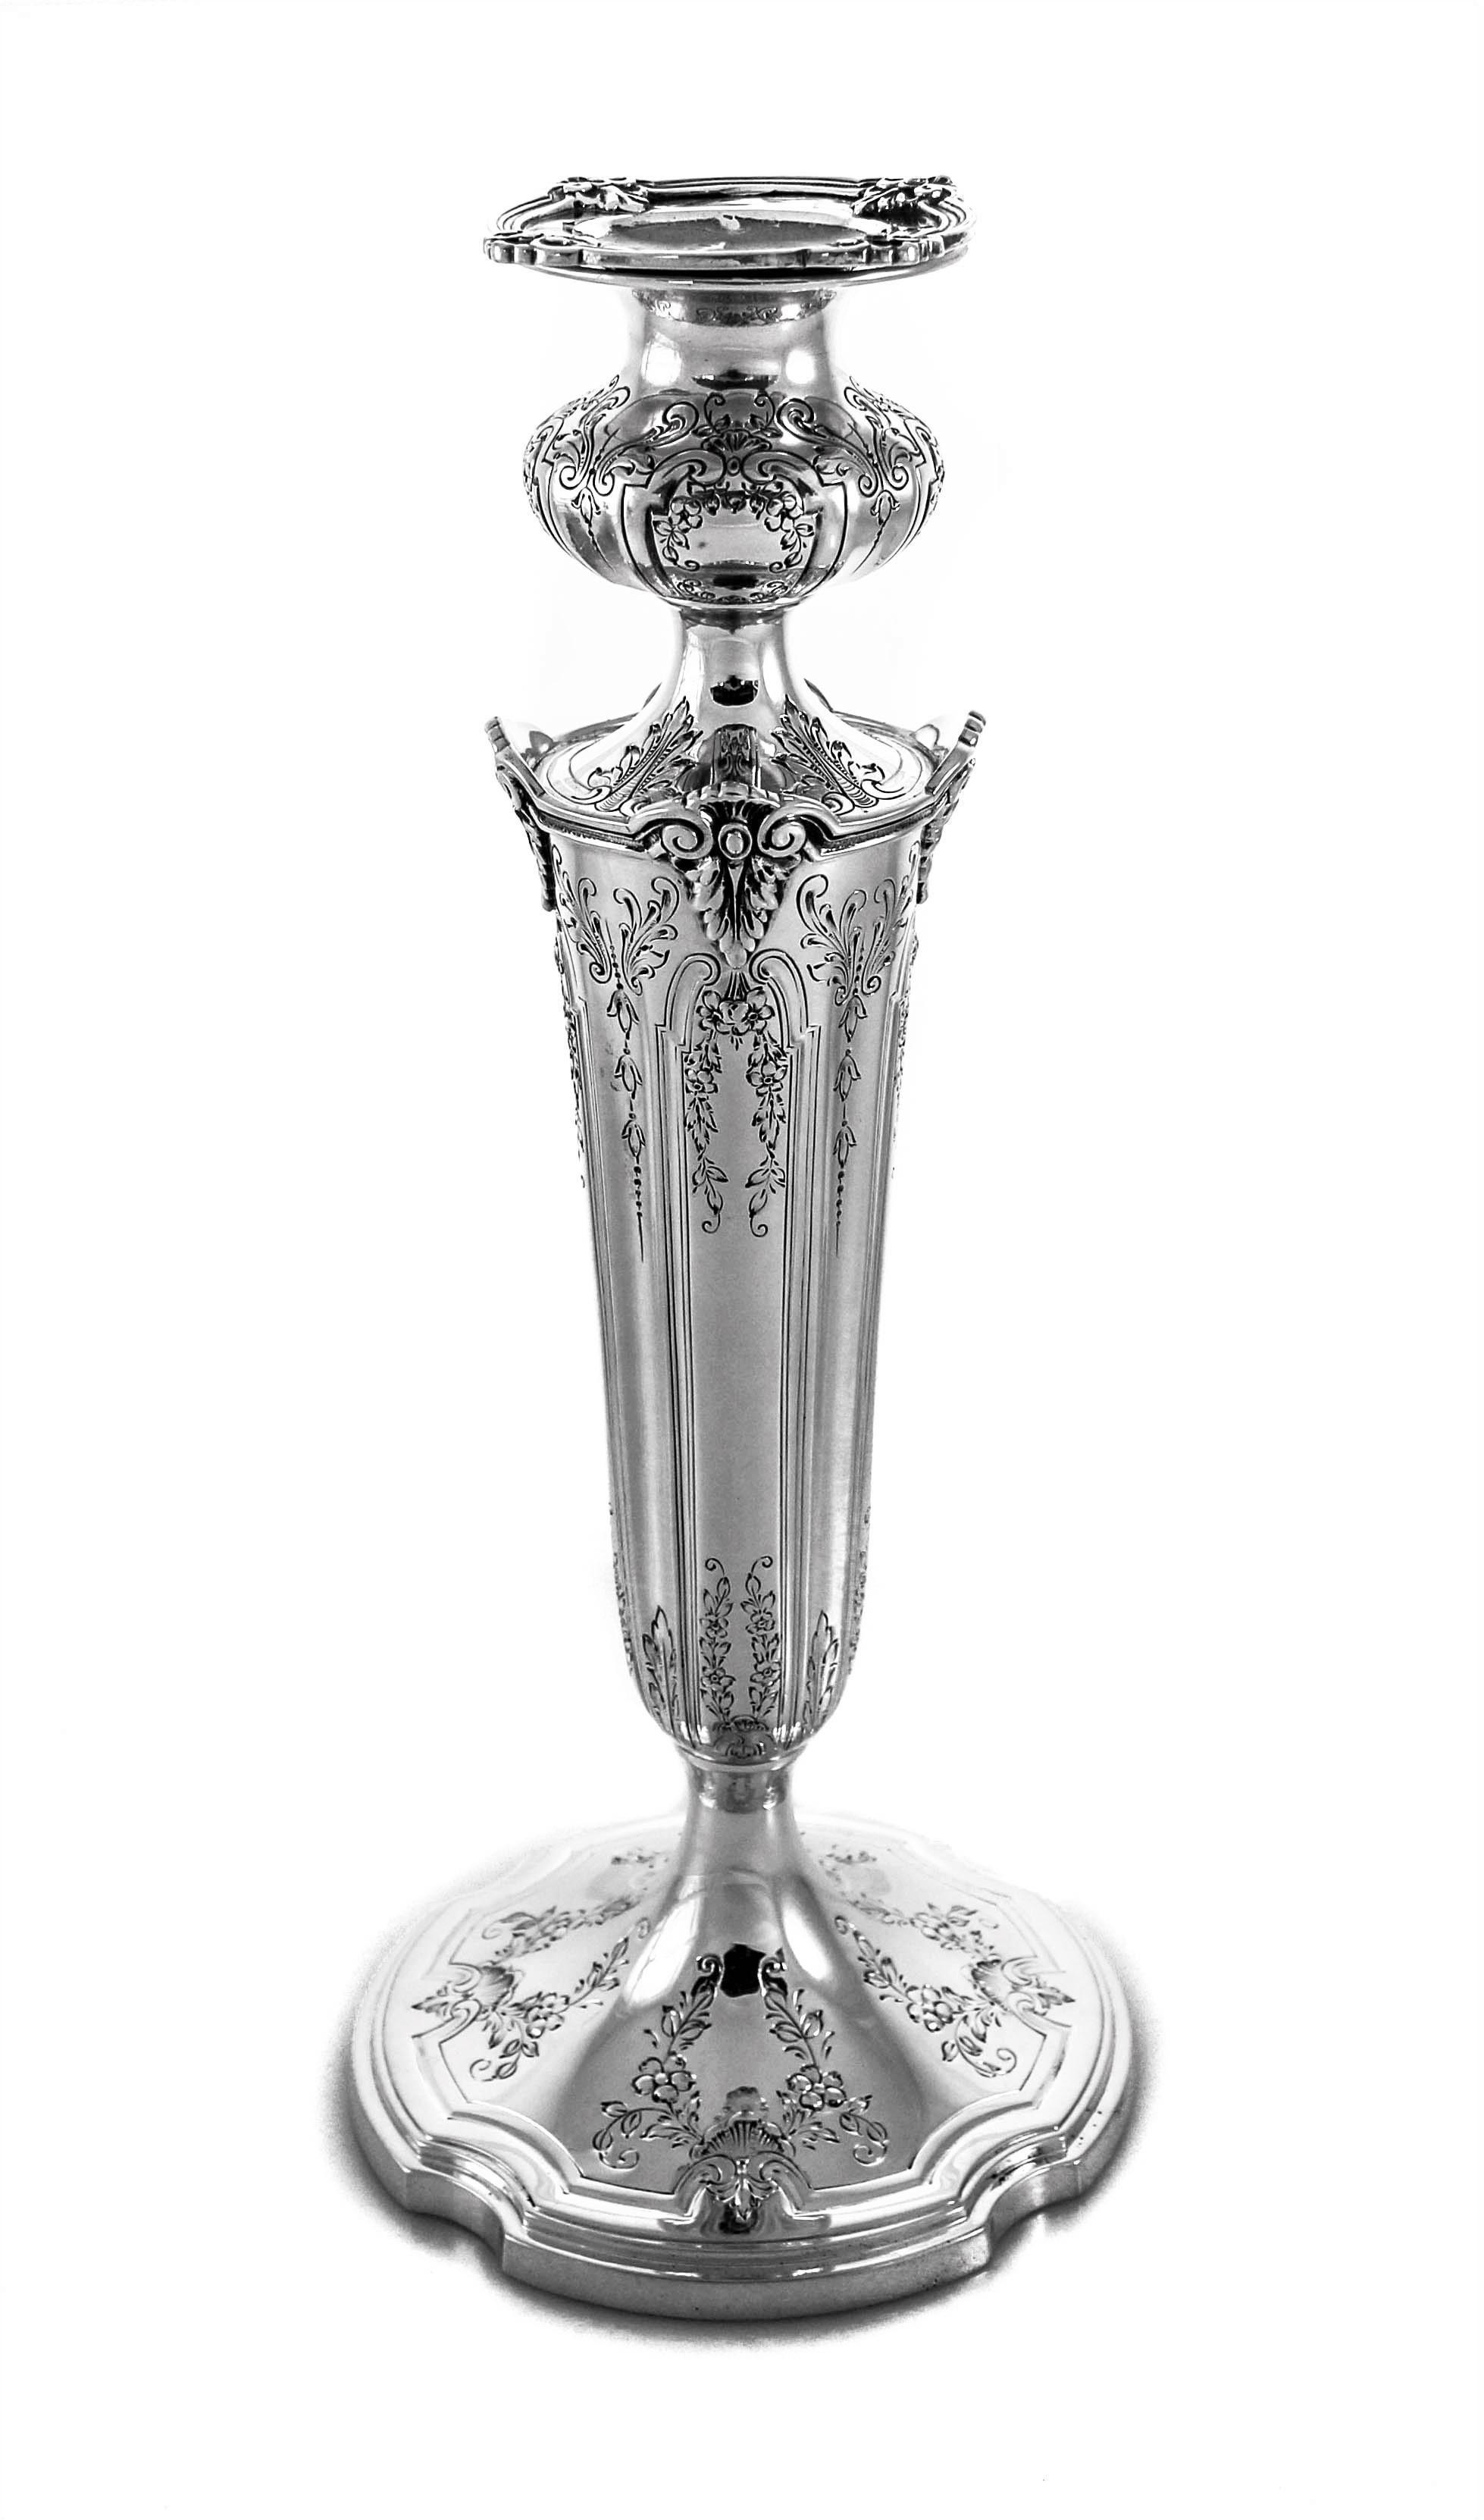 These sterling silver candlesticks have etched flowers and vines decorating the base and all around the top. Notice the scalloped base and the matching scalloped bobeche. Towards the top of the candlestick the silver juts out to form little corners.